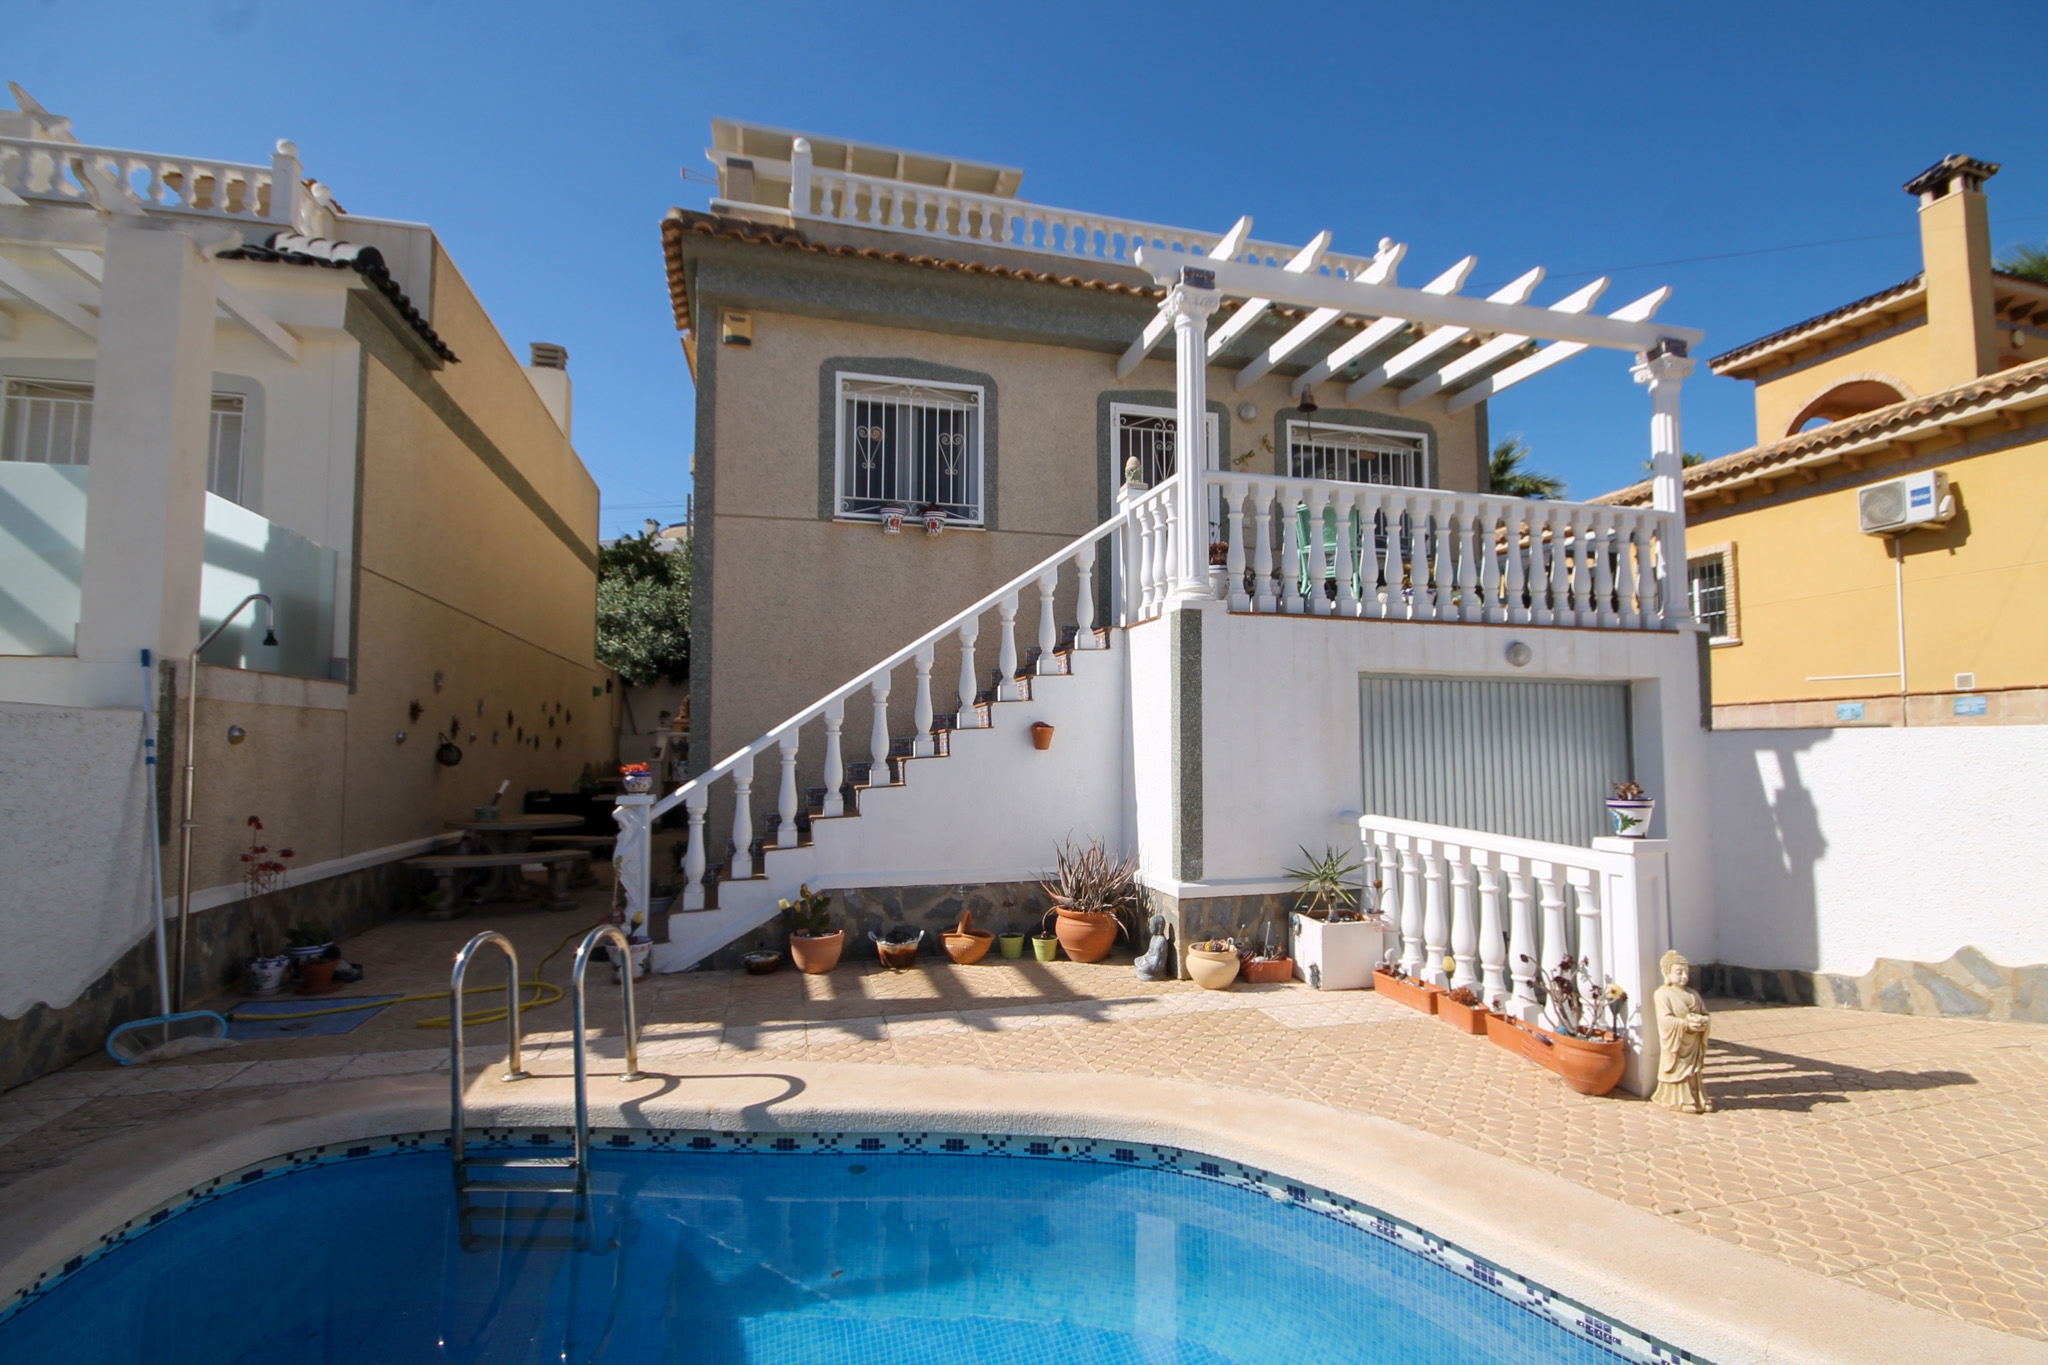 5 Bed Detached villa with private pool